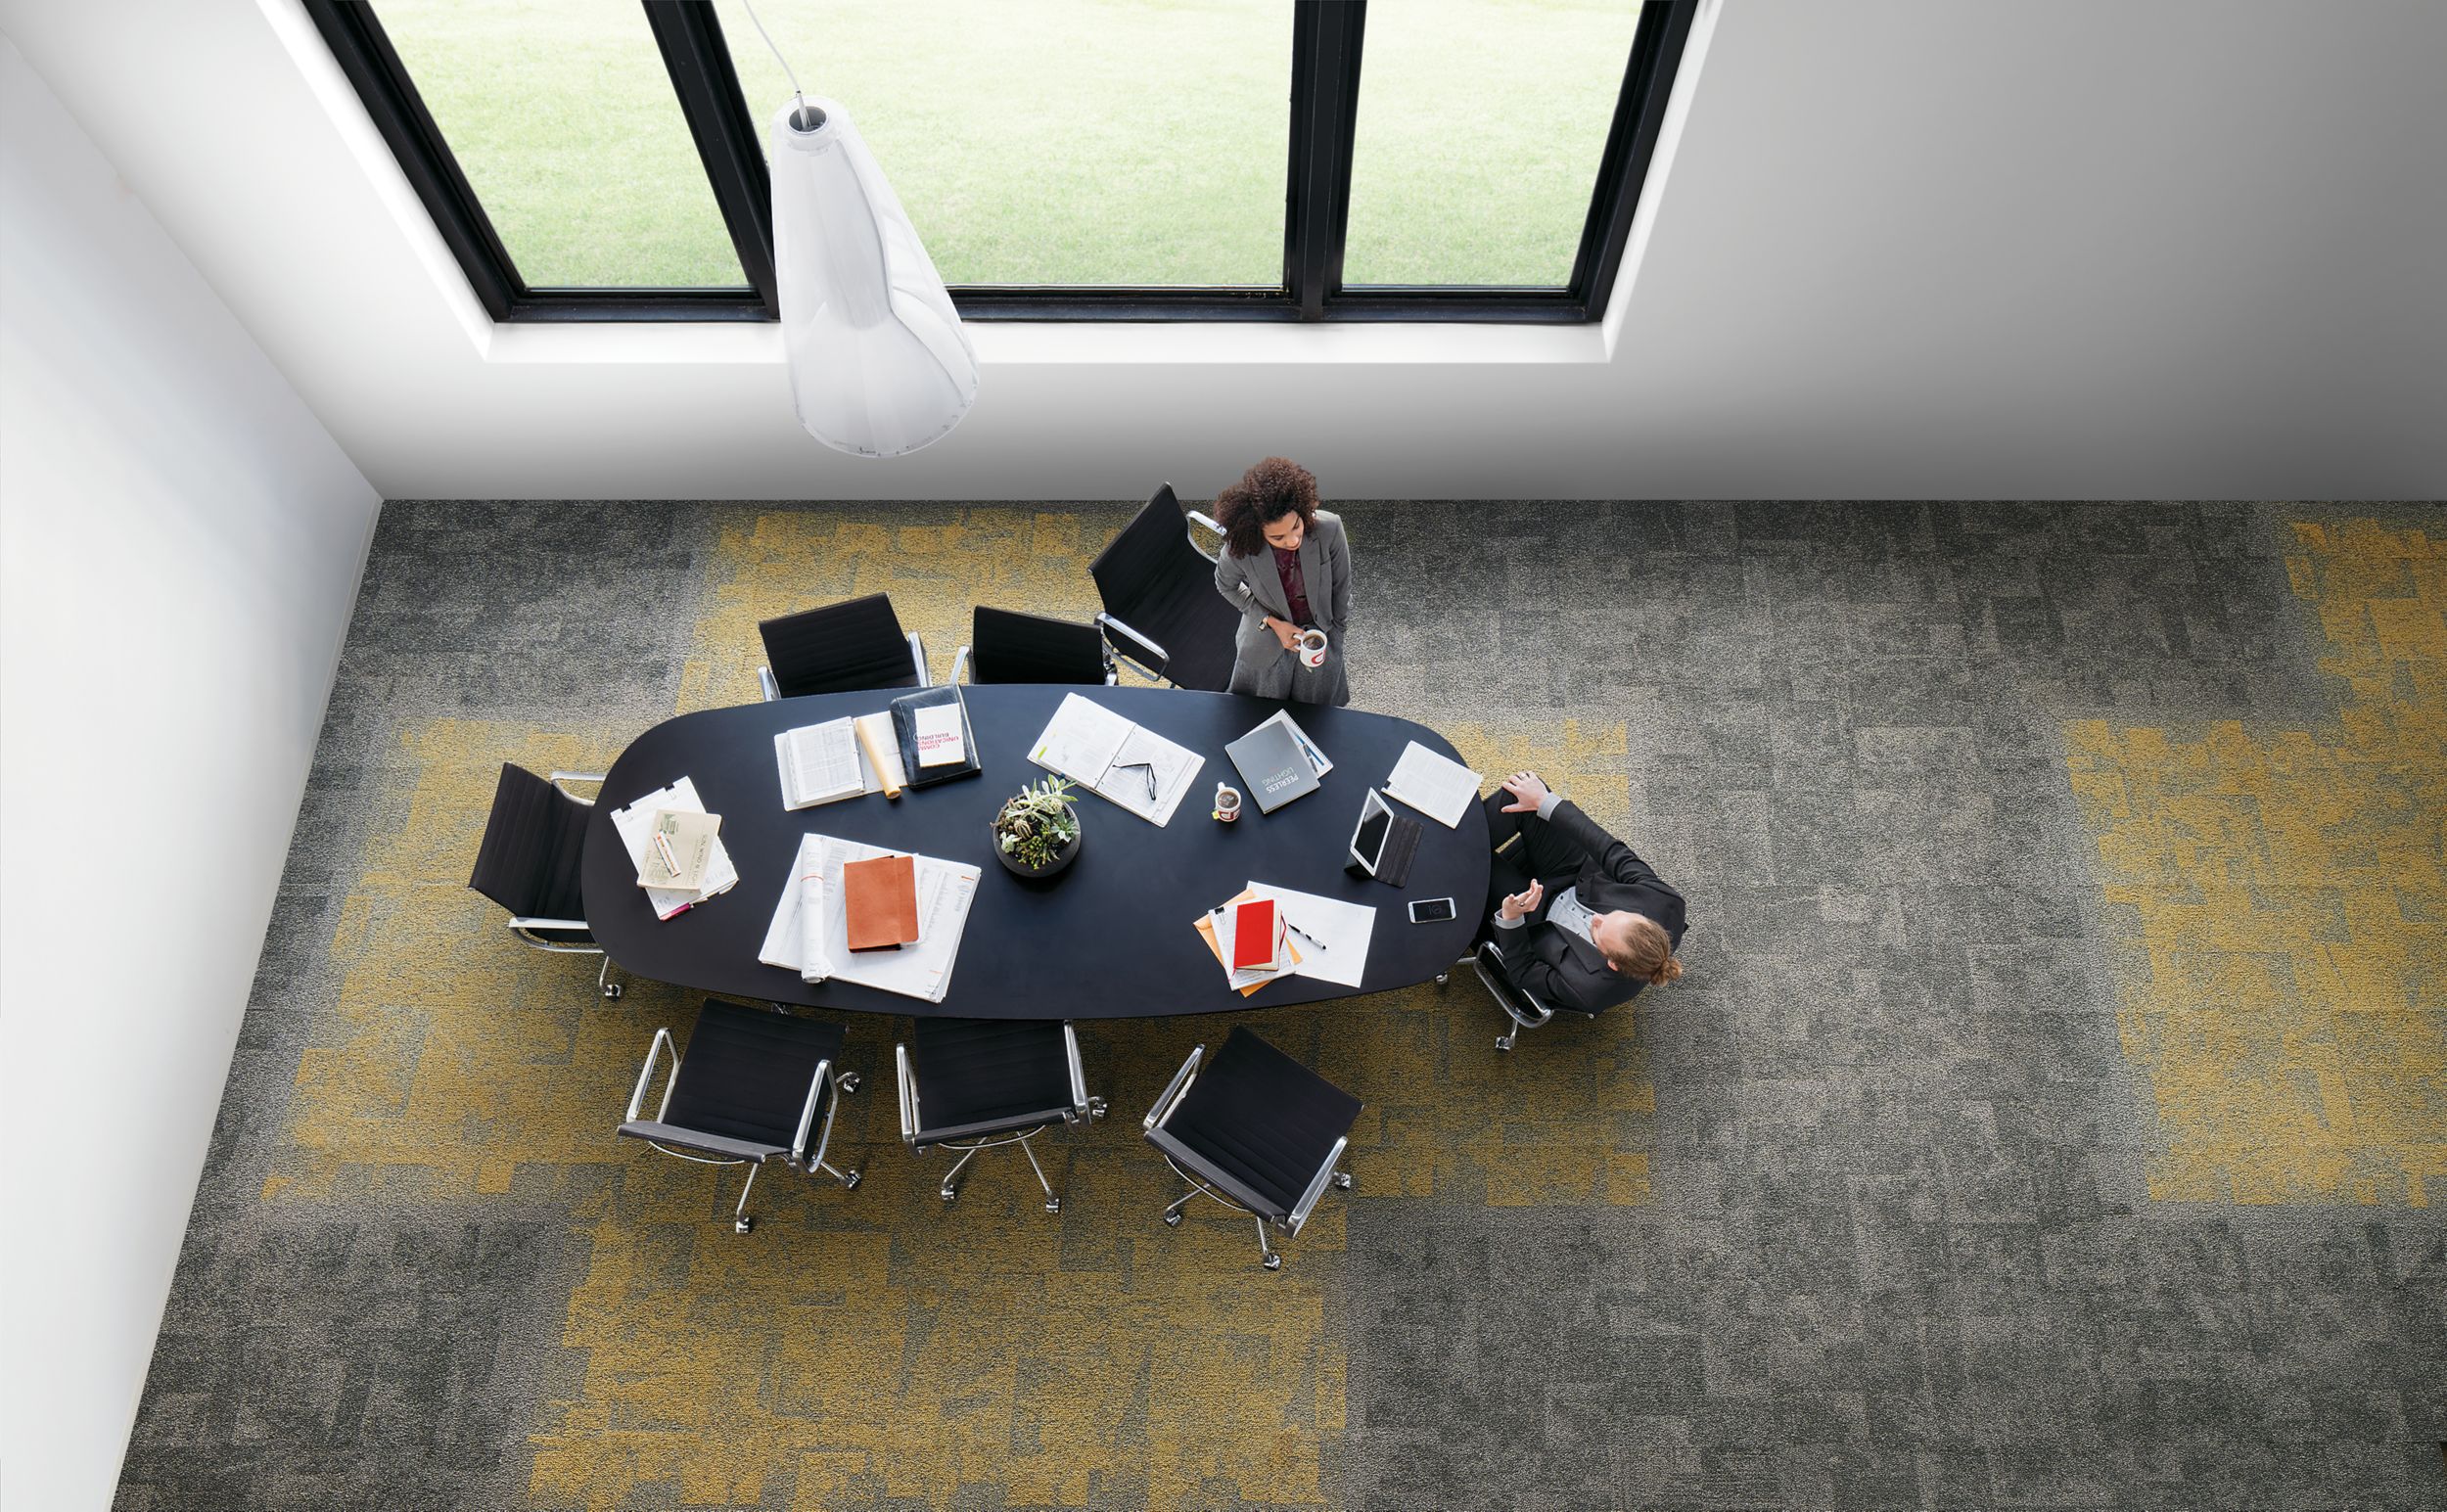 Interface Open Air 404 carpet tile in overhead view of meeting table with man and woman talking and drinking coffee image number 12